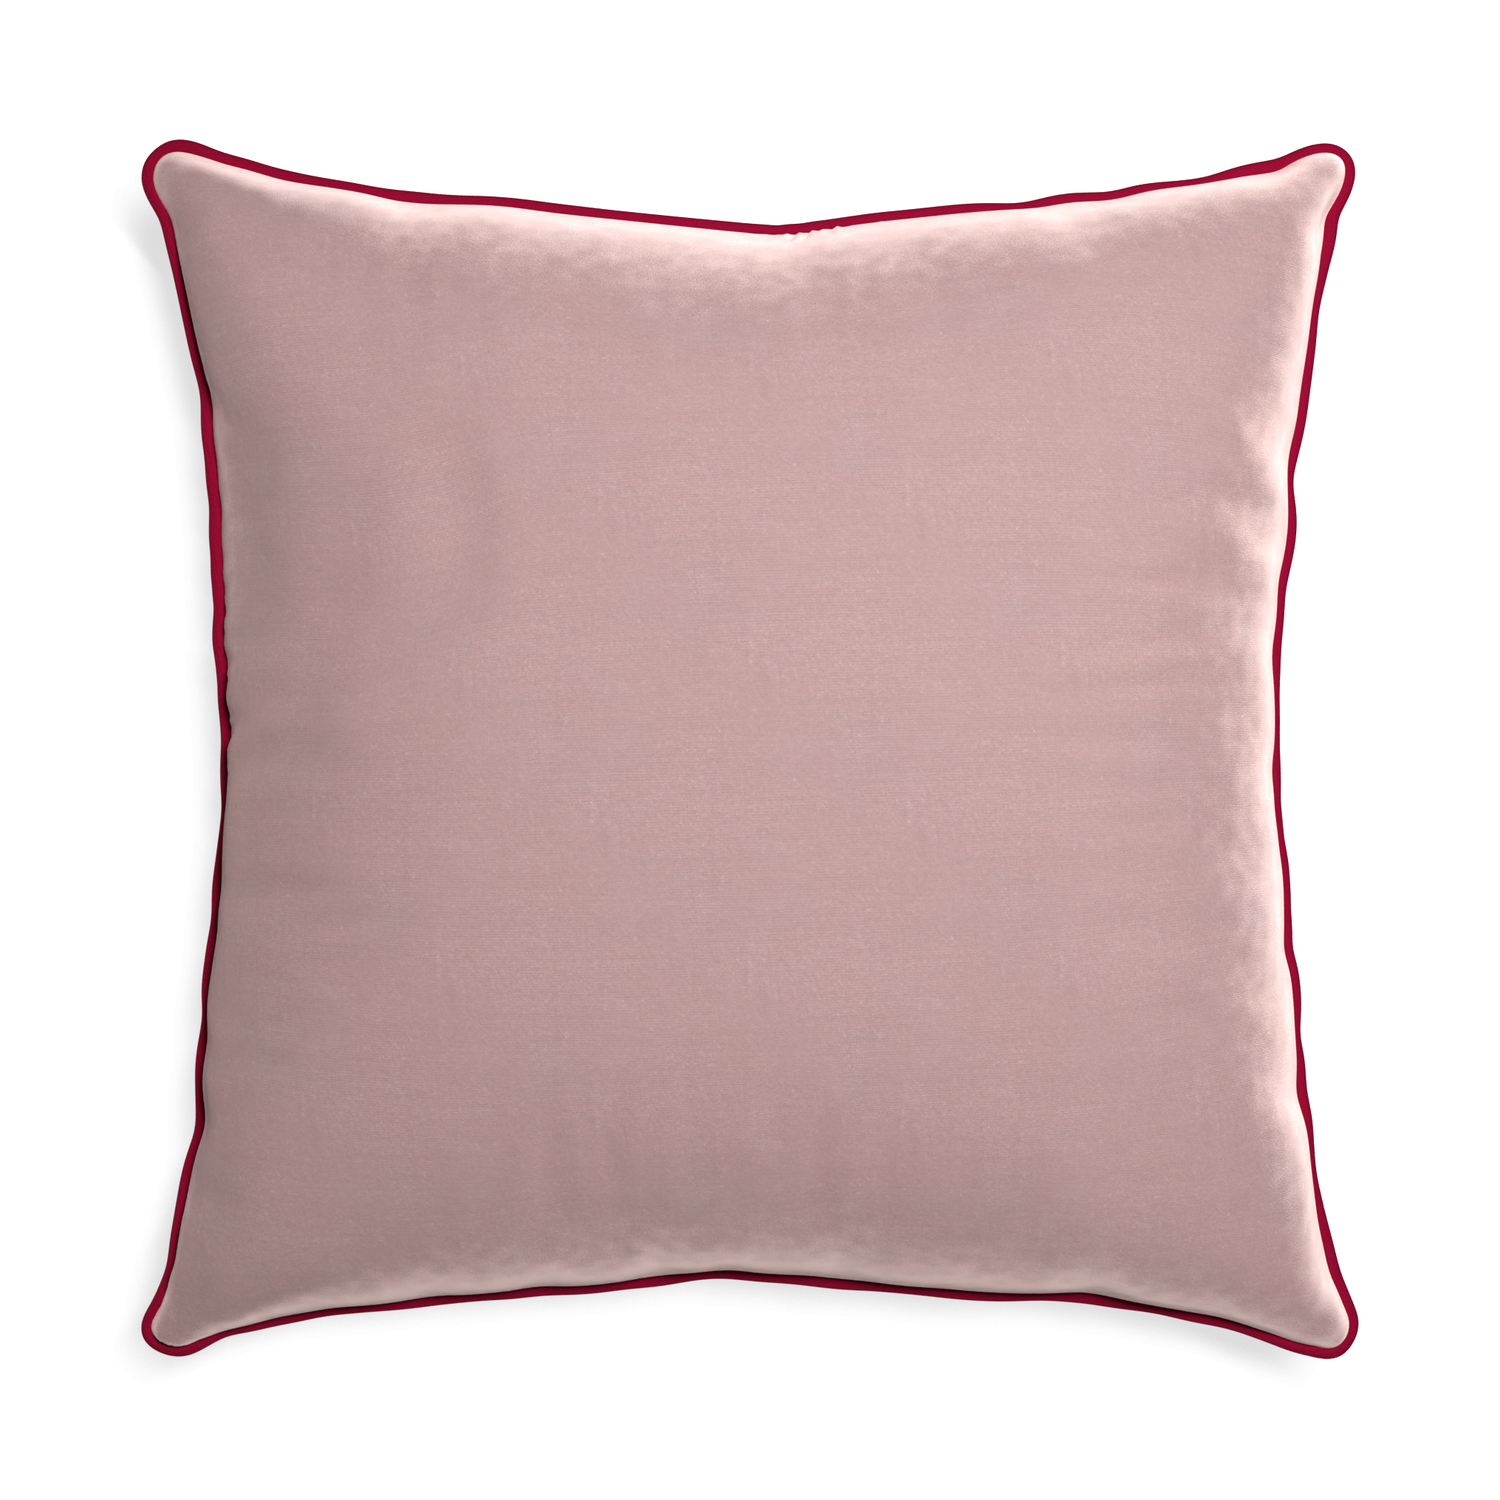 square mauve velvet pillow with dark red piping